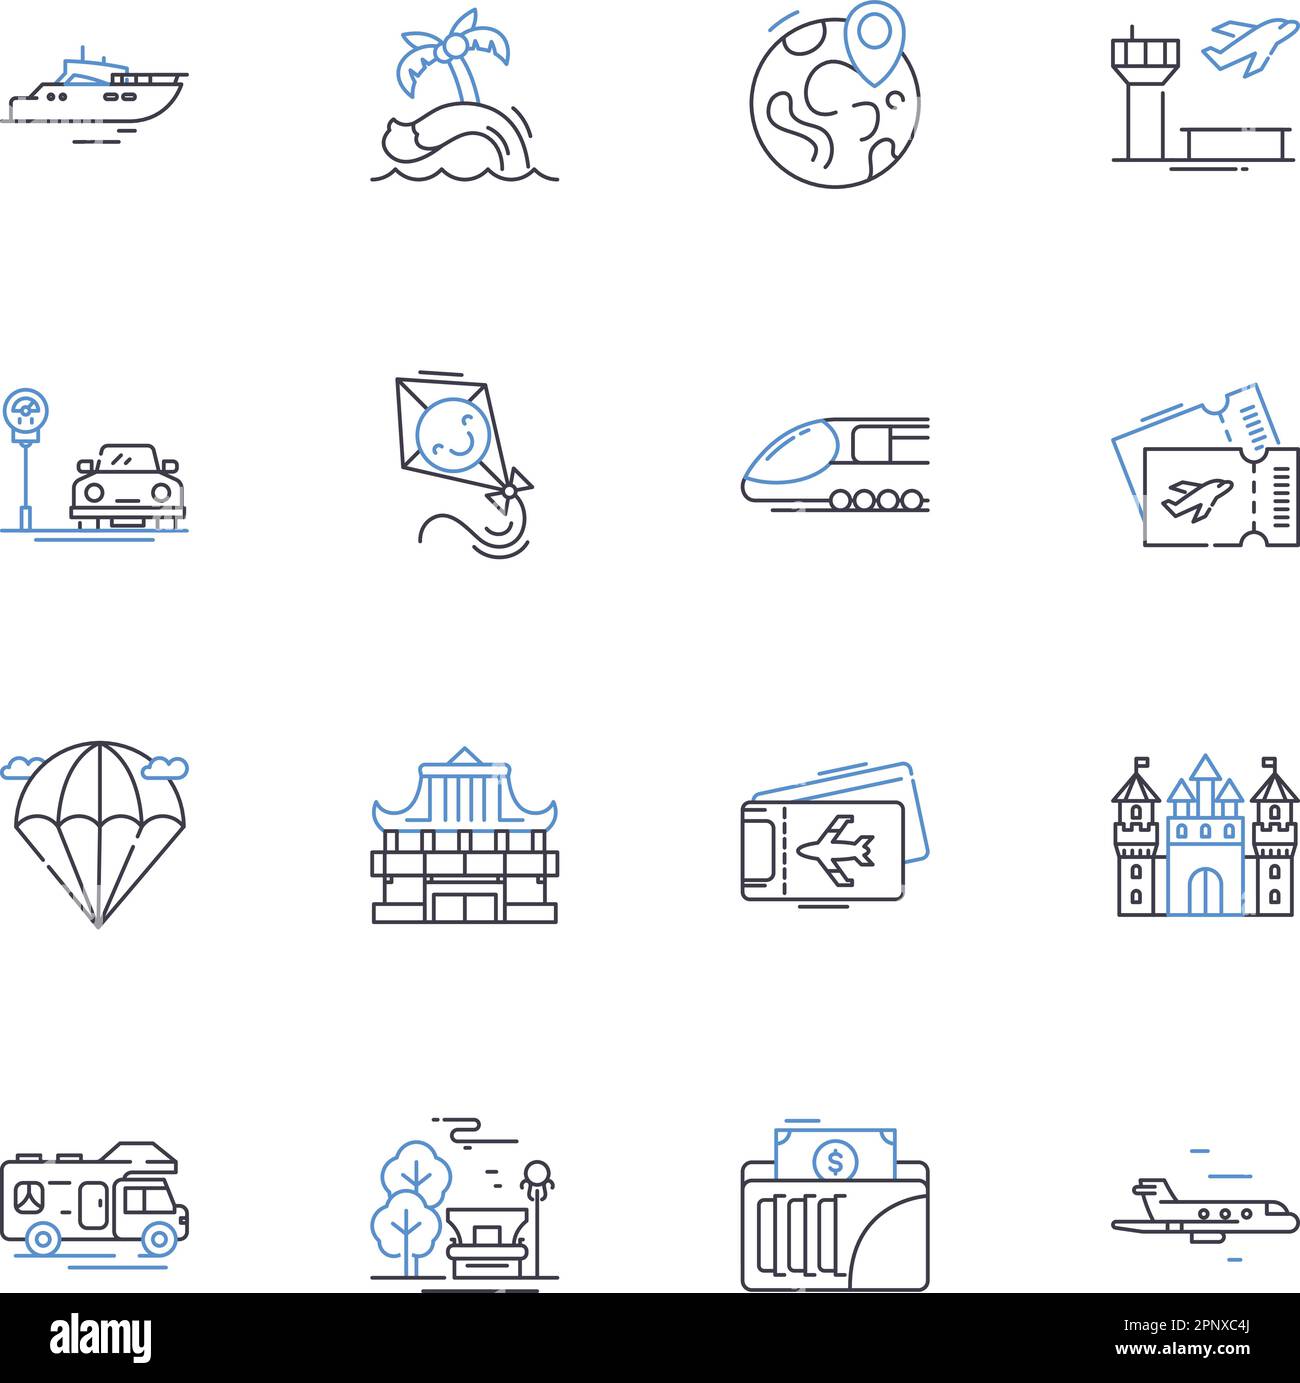 Sightseeing line icons collection. Monuments, Landmarks, Architecture, Views, Scenery, Attractions, Places vector and linear illustration. Tourist Stock Vector